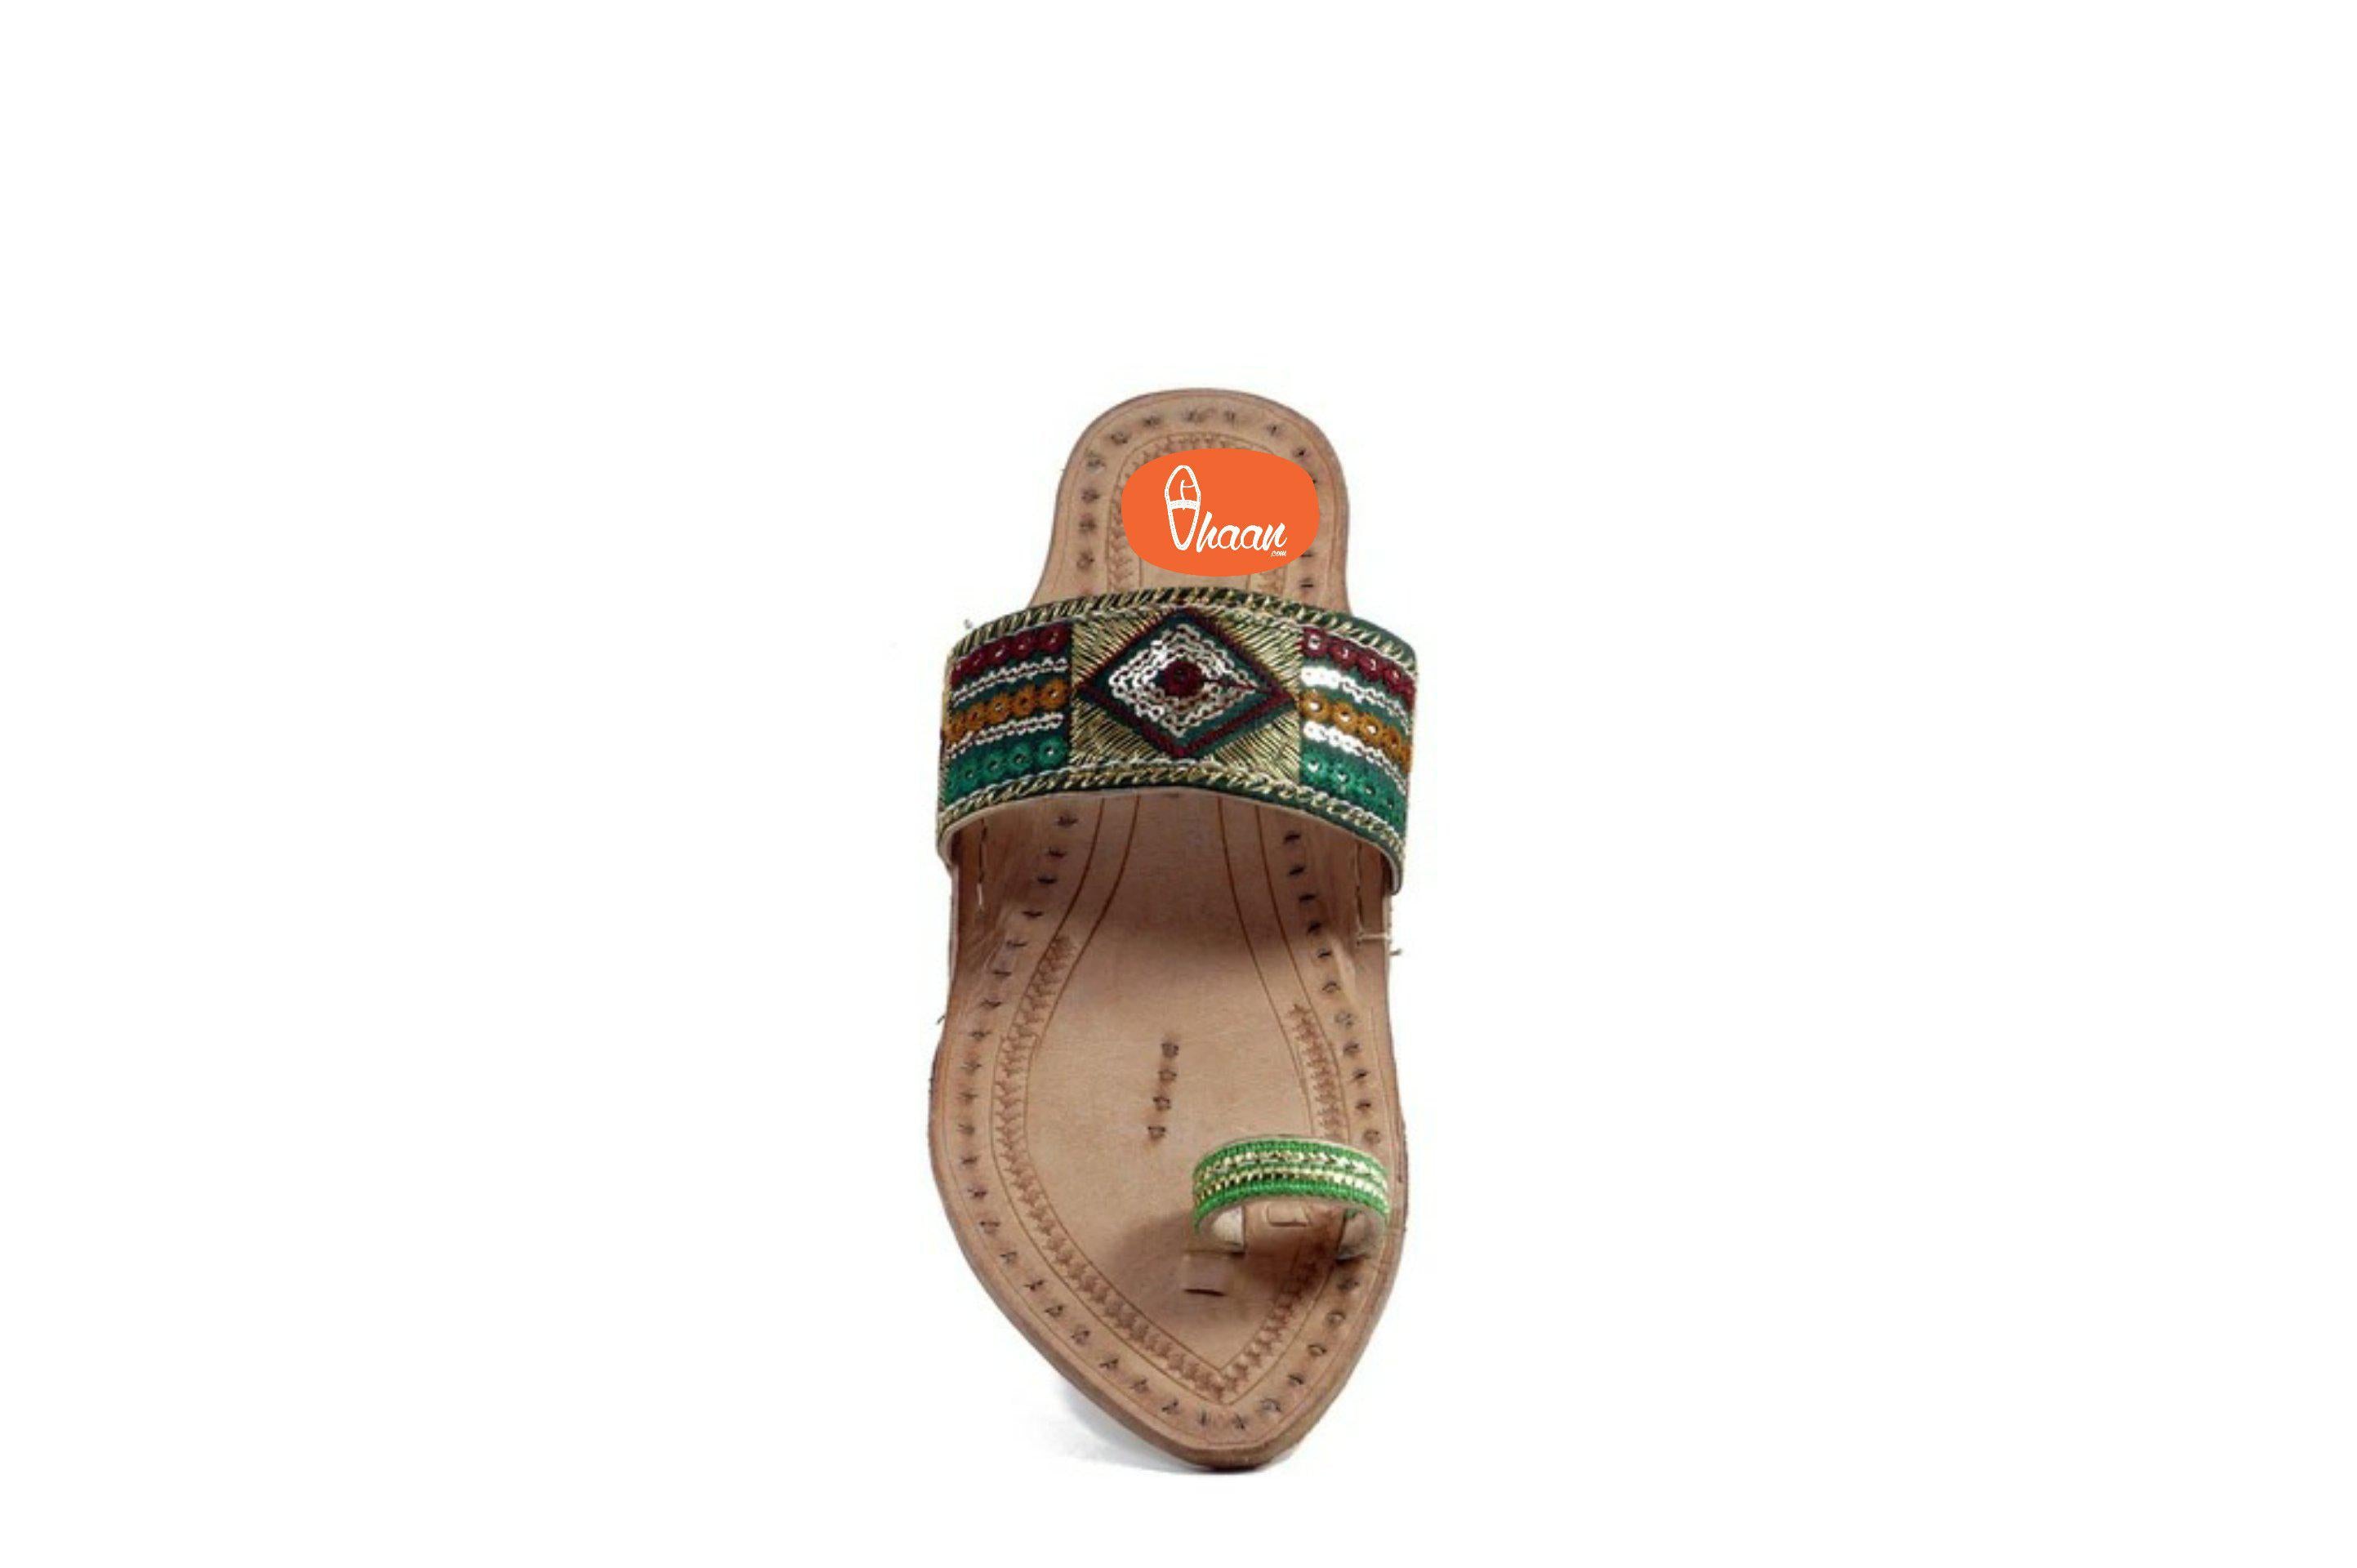 Kolhapuri chappal for ladies embroidered with Emerald